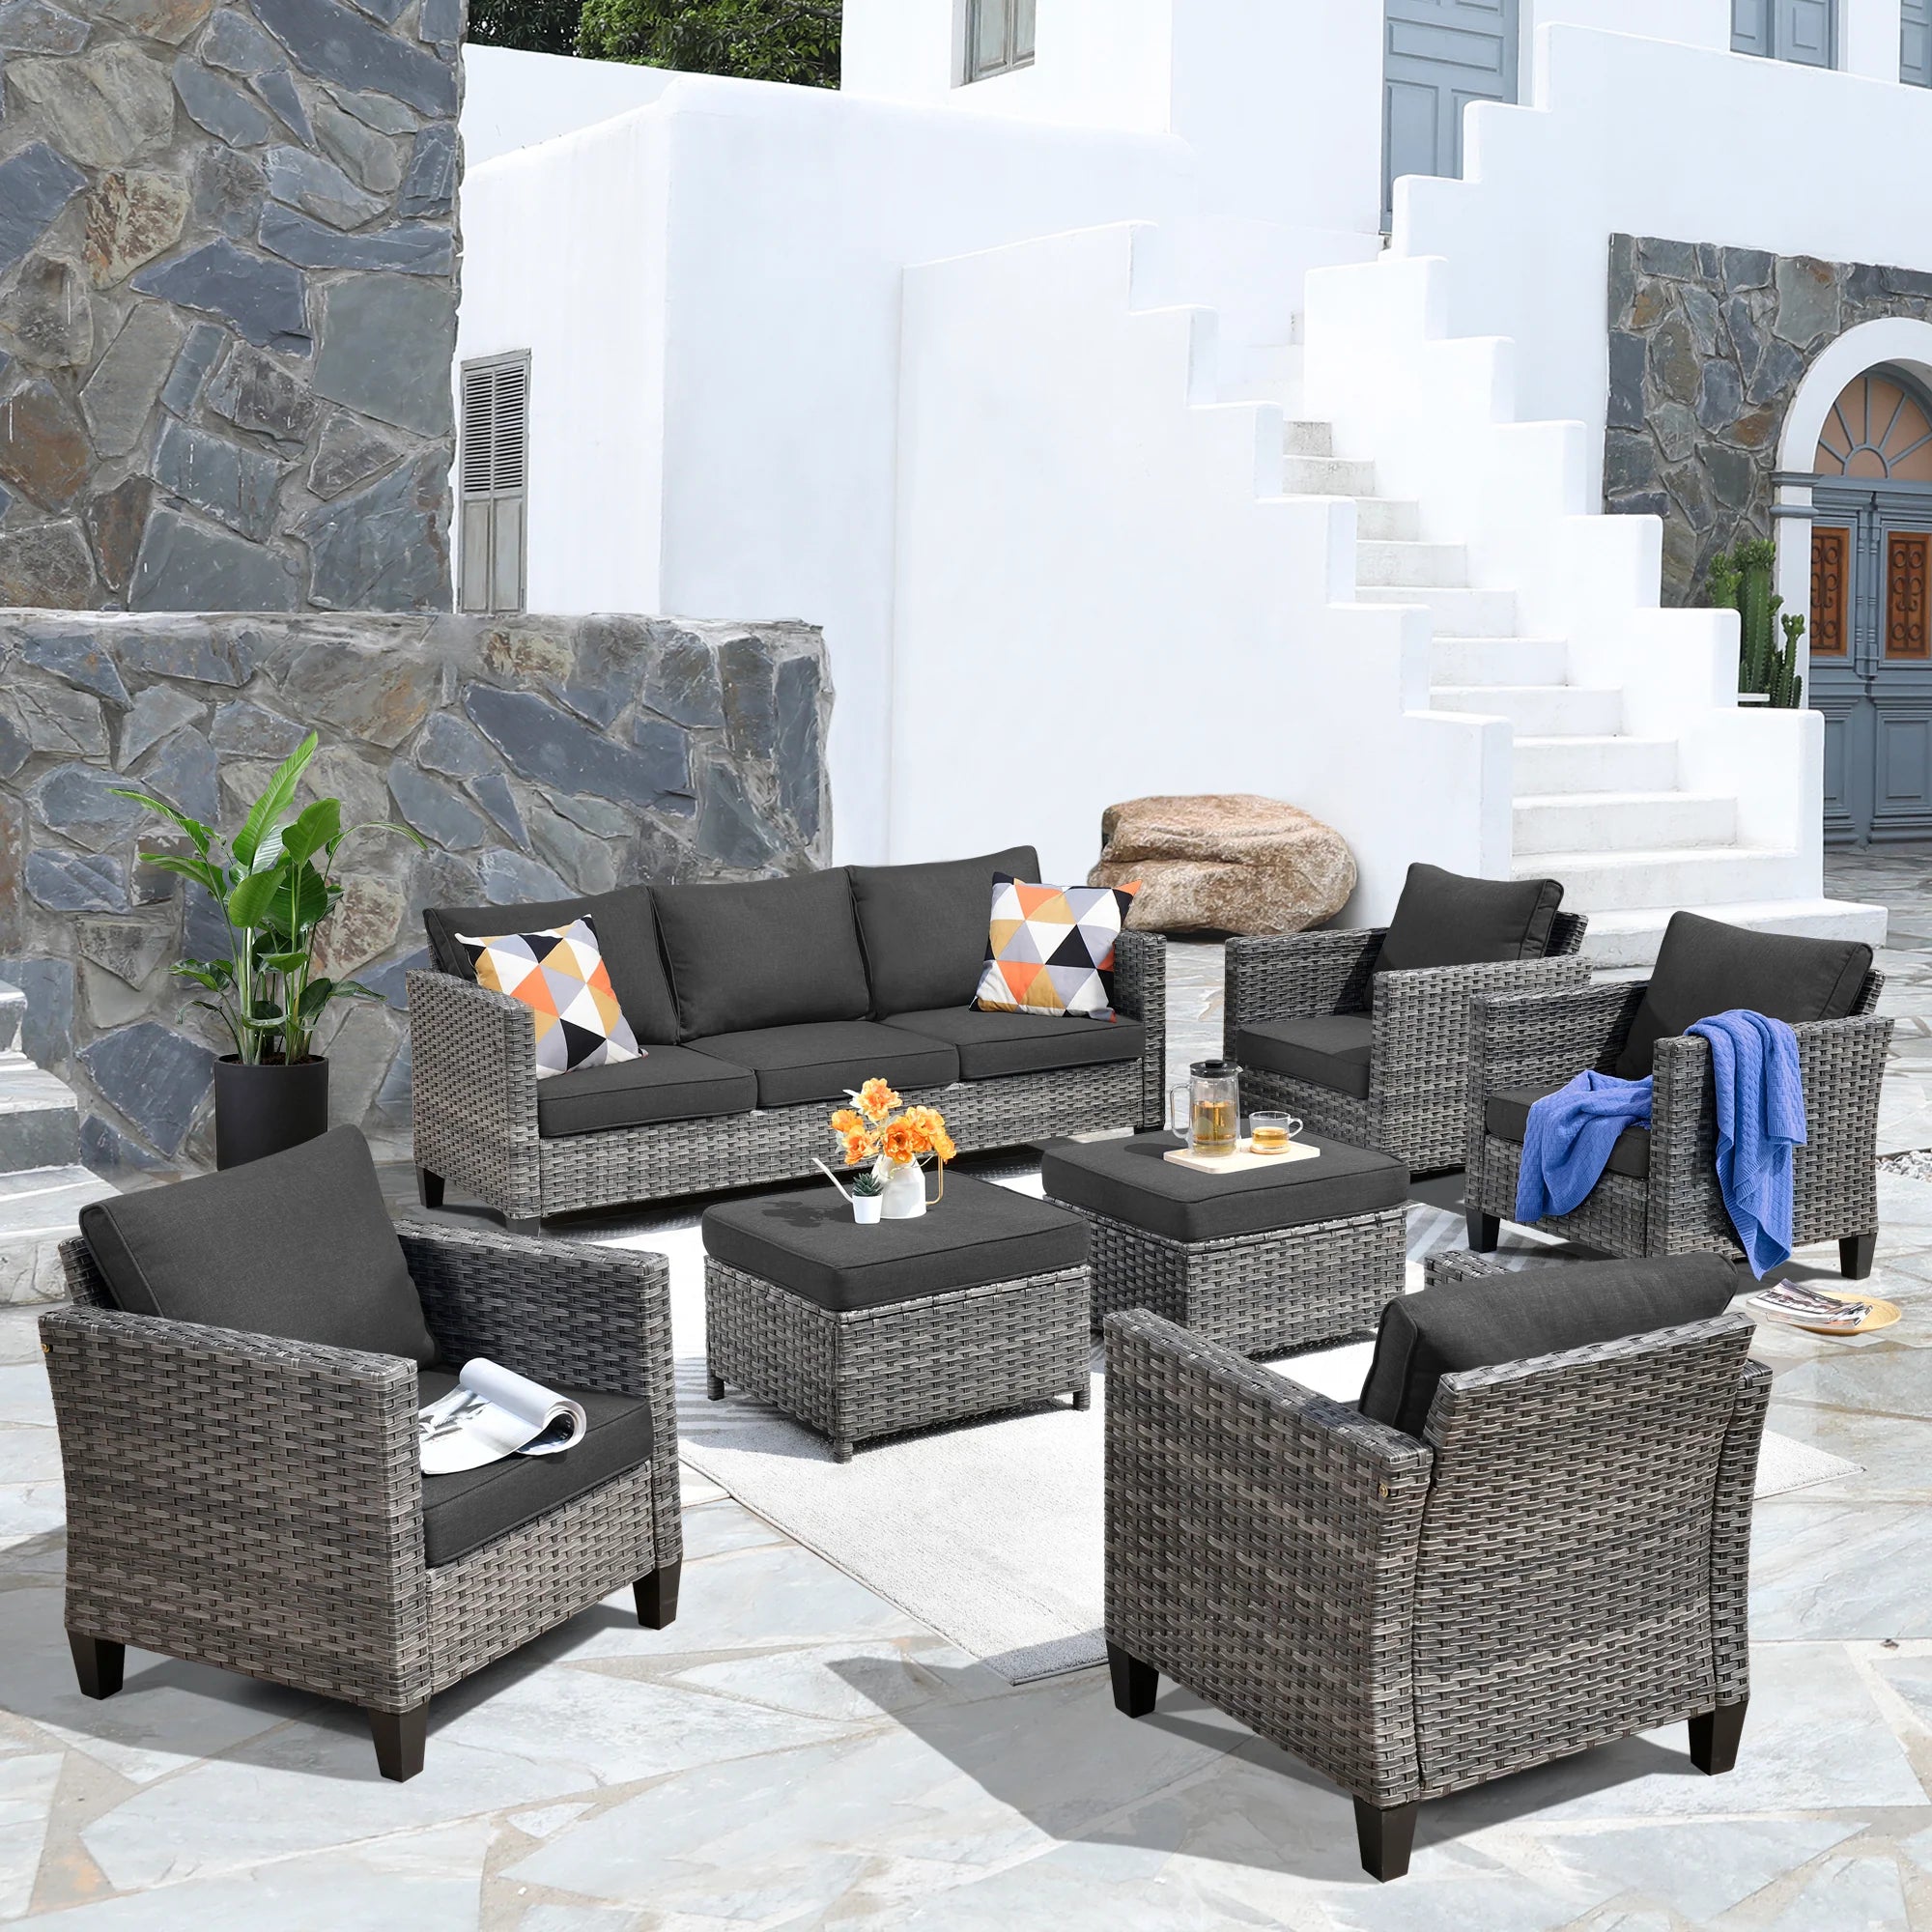 What Are the Benefits of Investing in a High-Quality Patio Conversation Set?